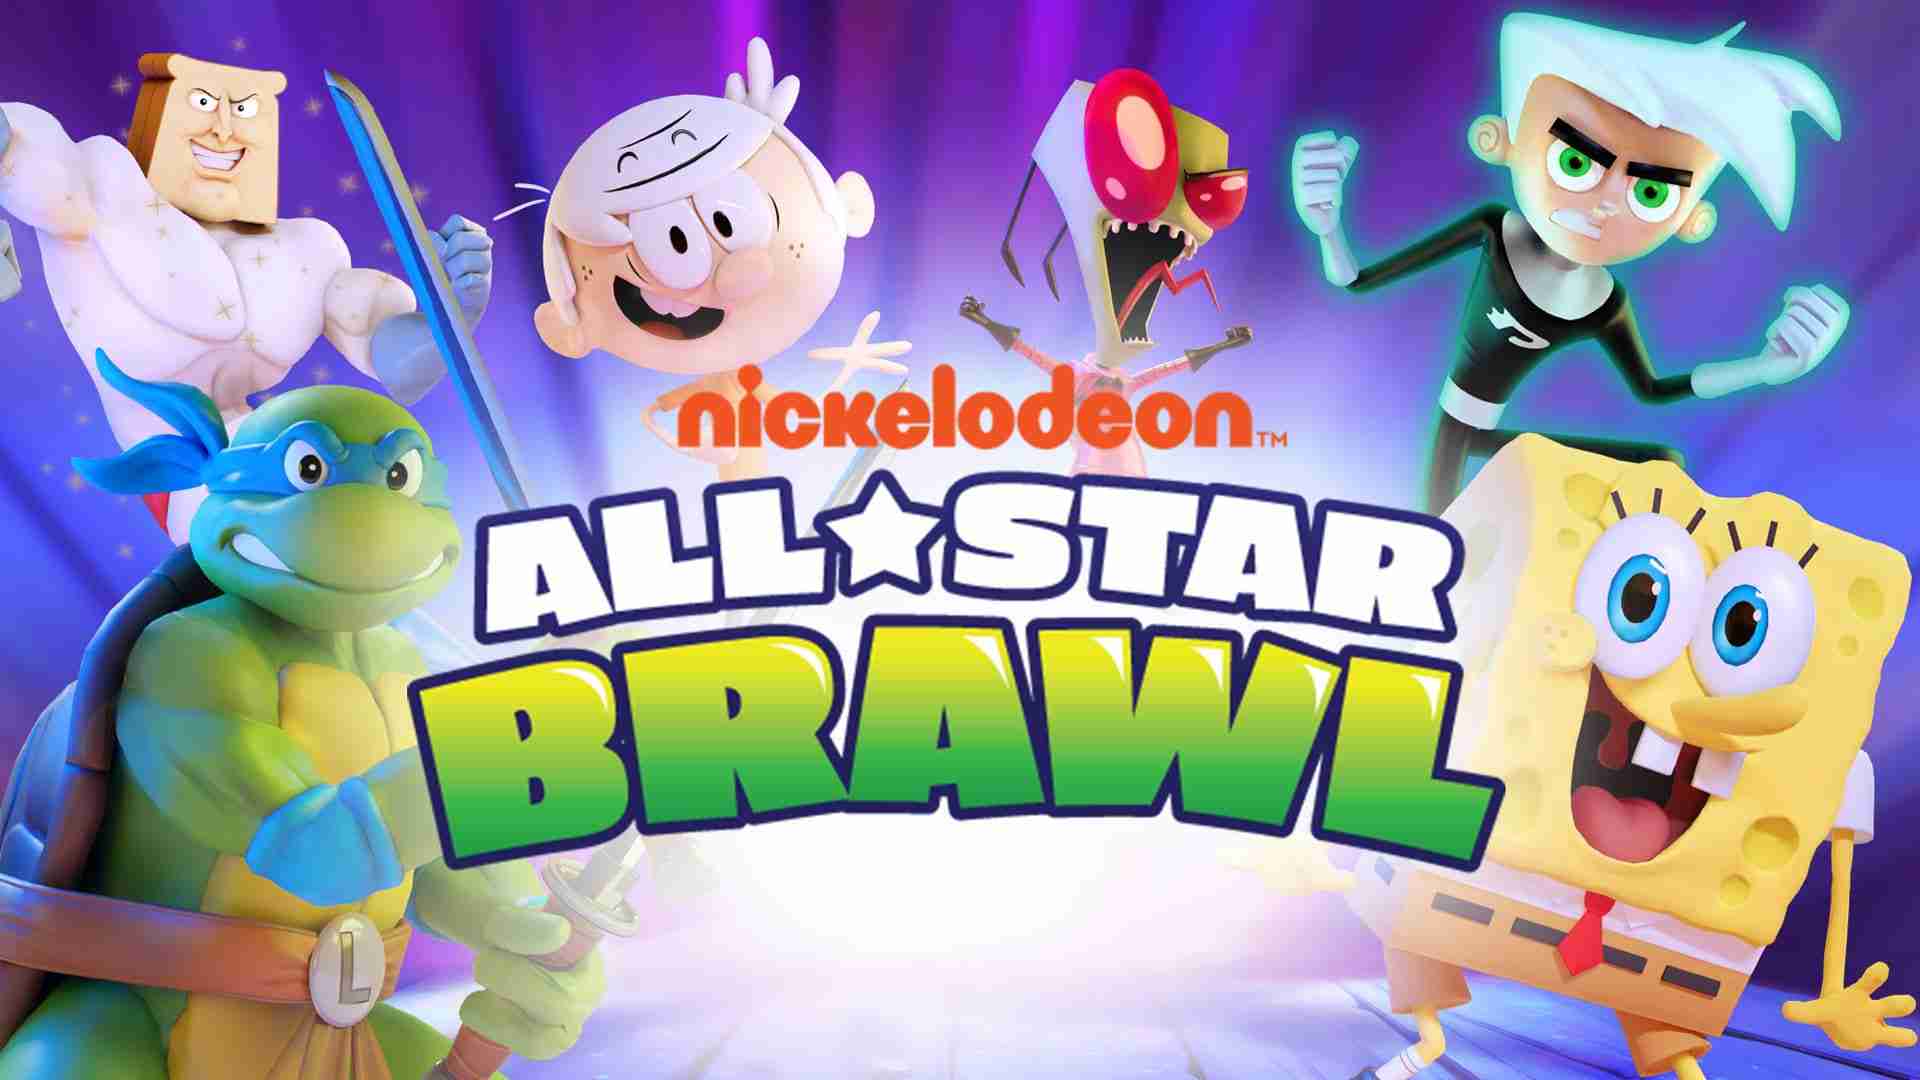 Nickelodeon All Star Brawl is Out